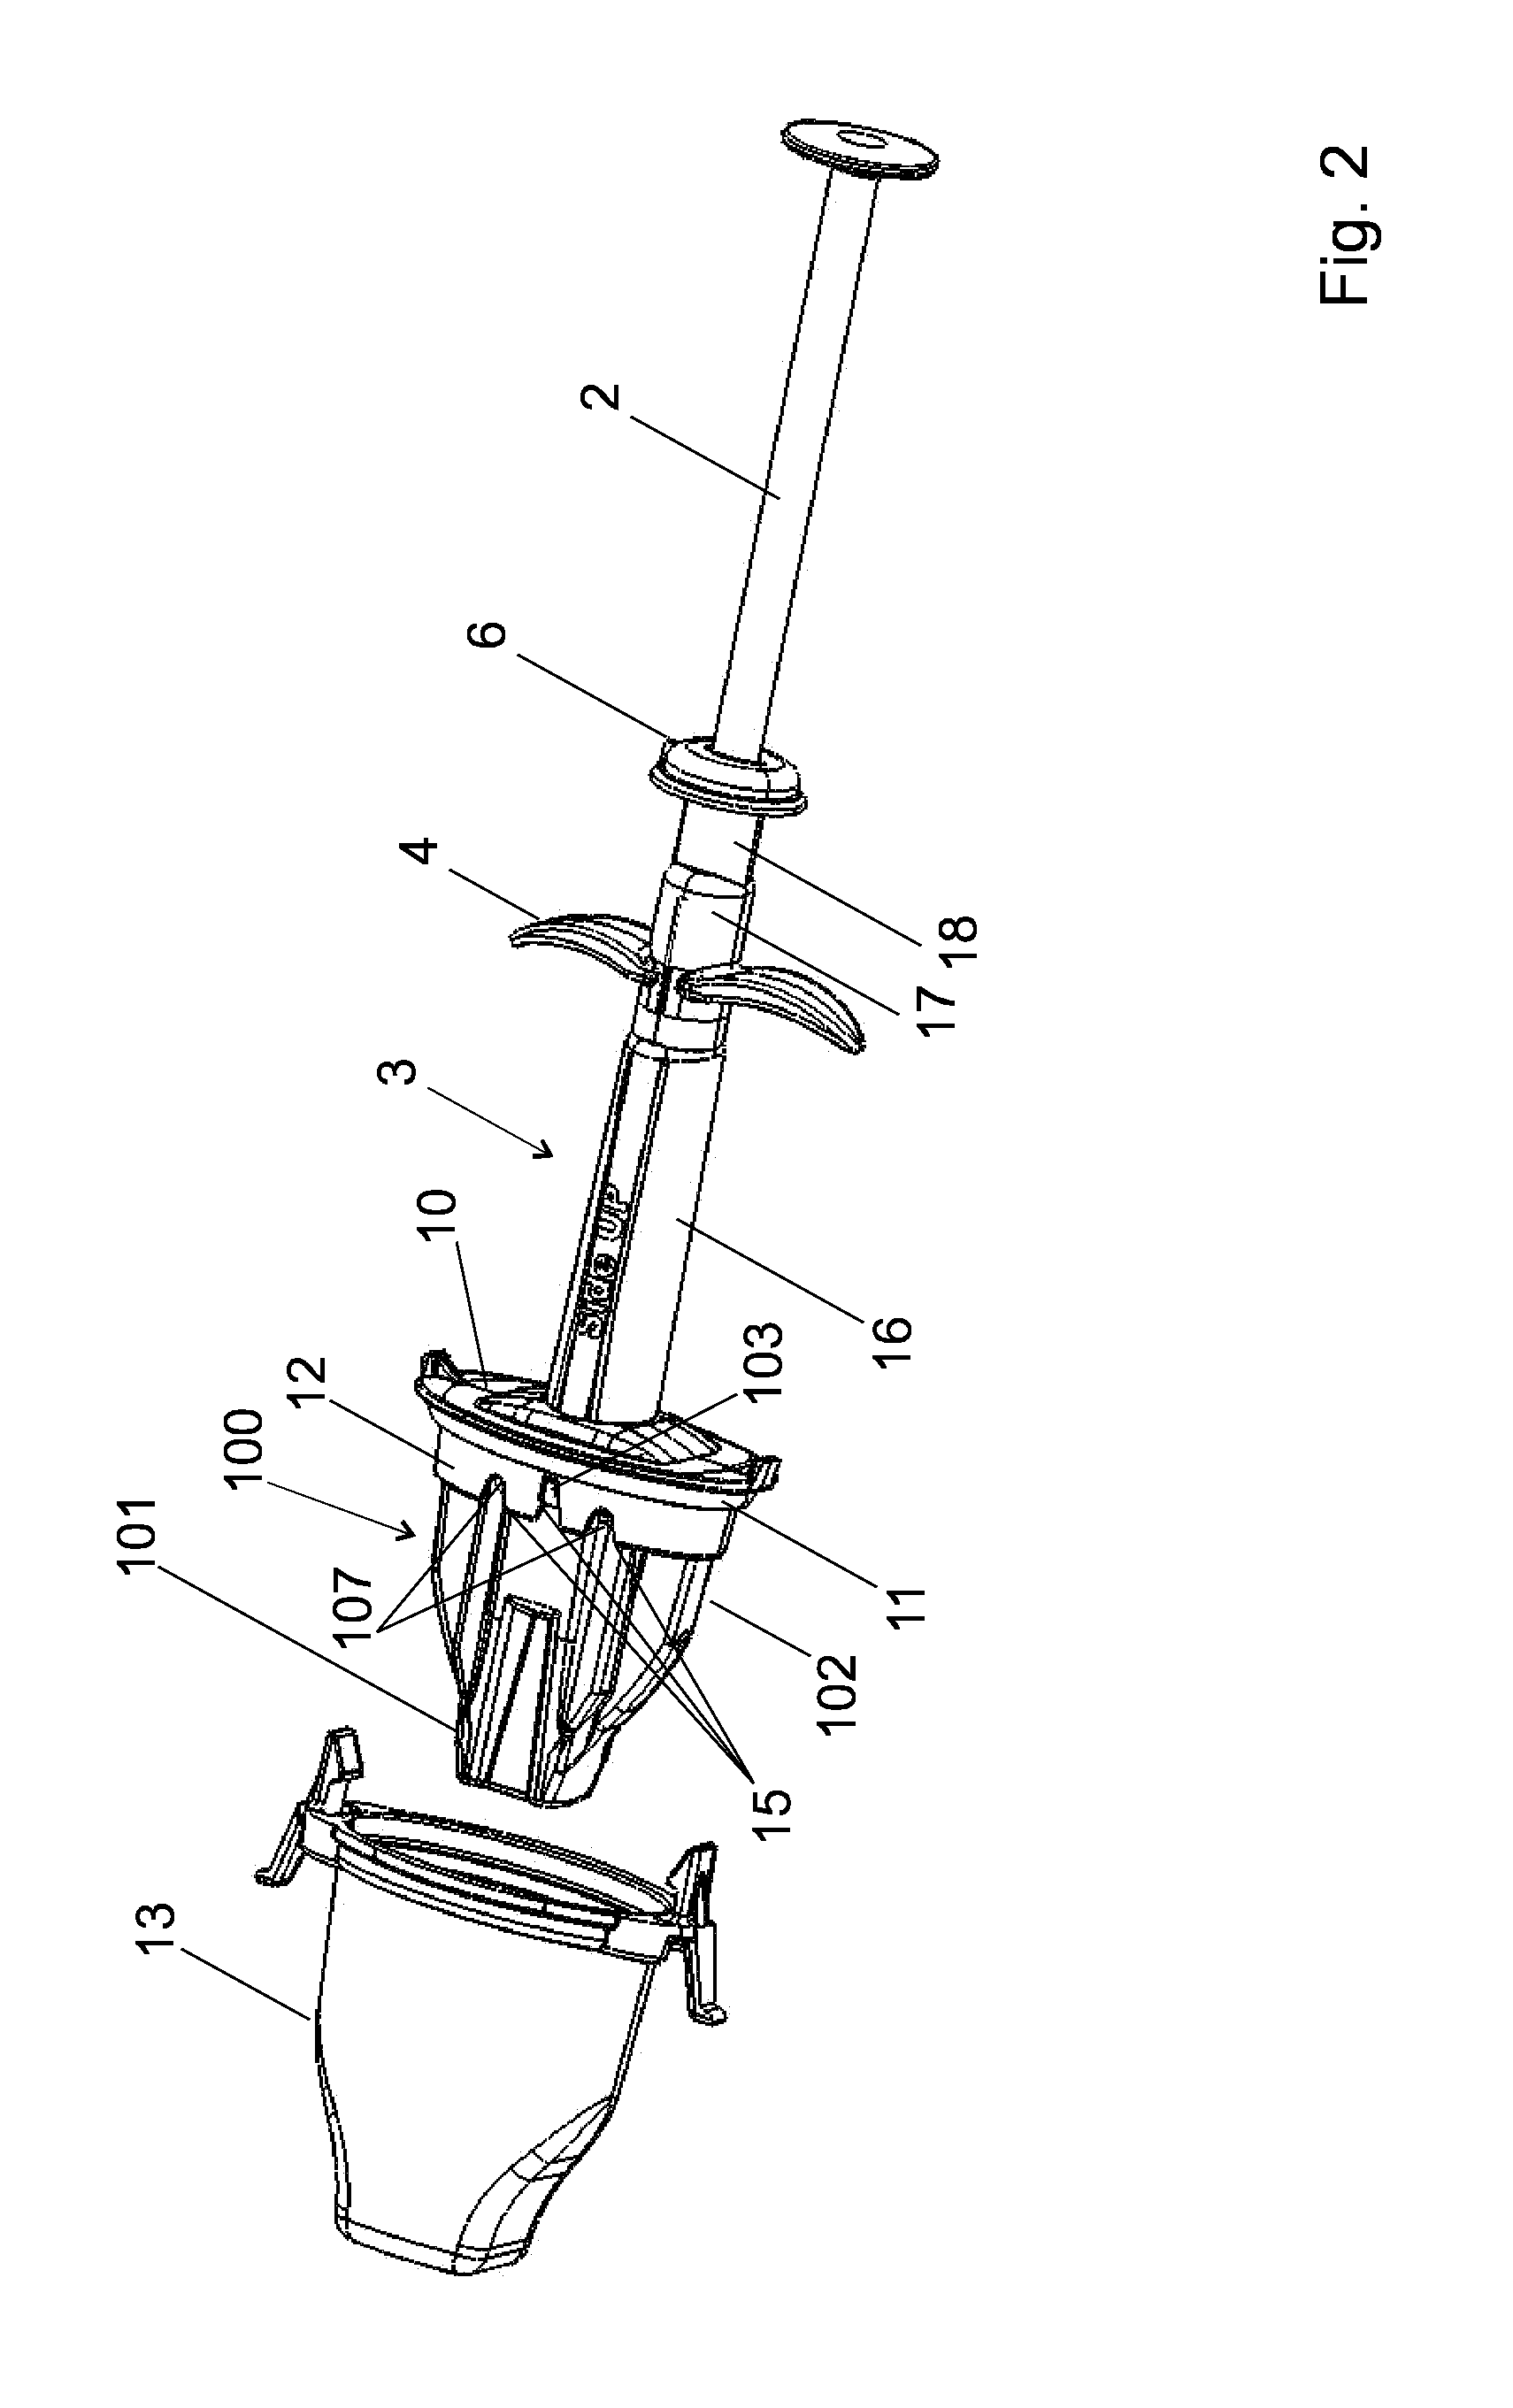 Device for holding folding and injecting an intraocular lens